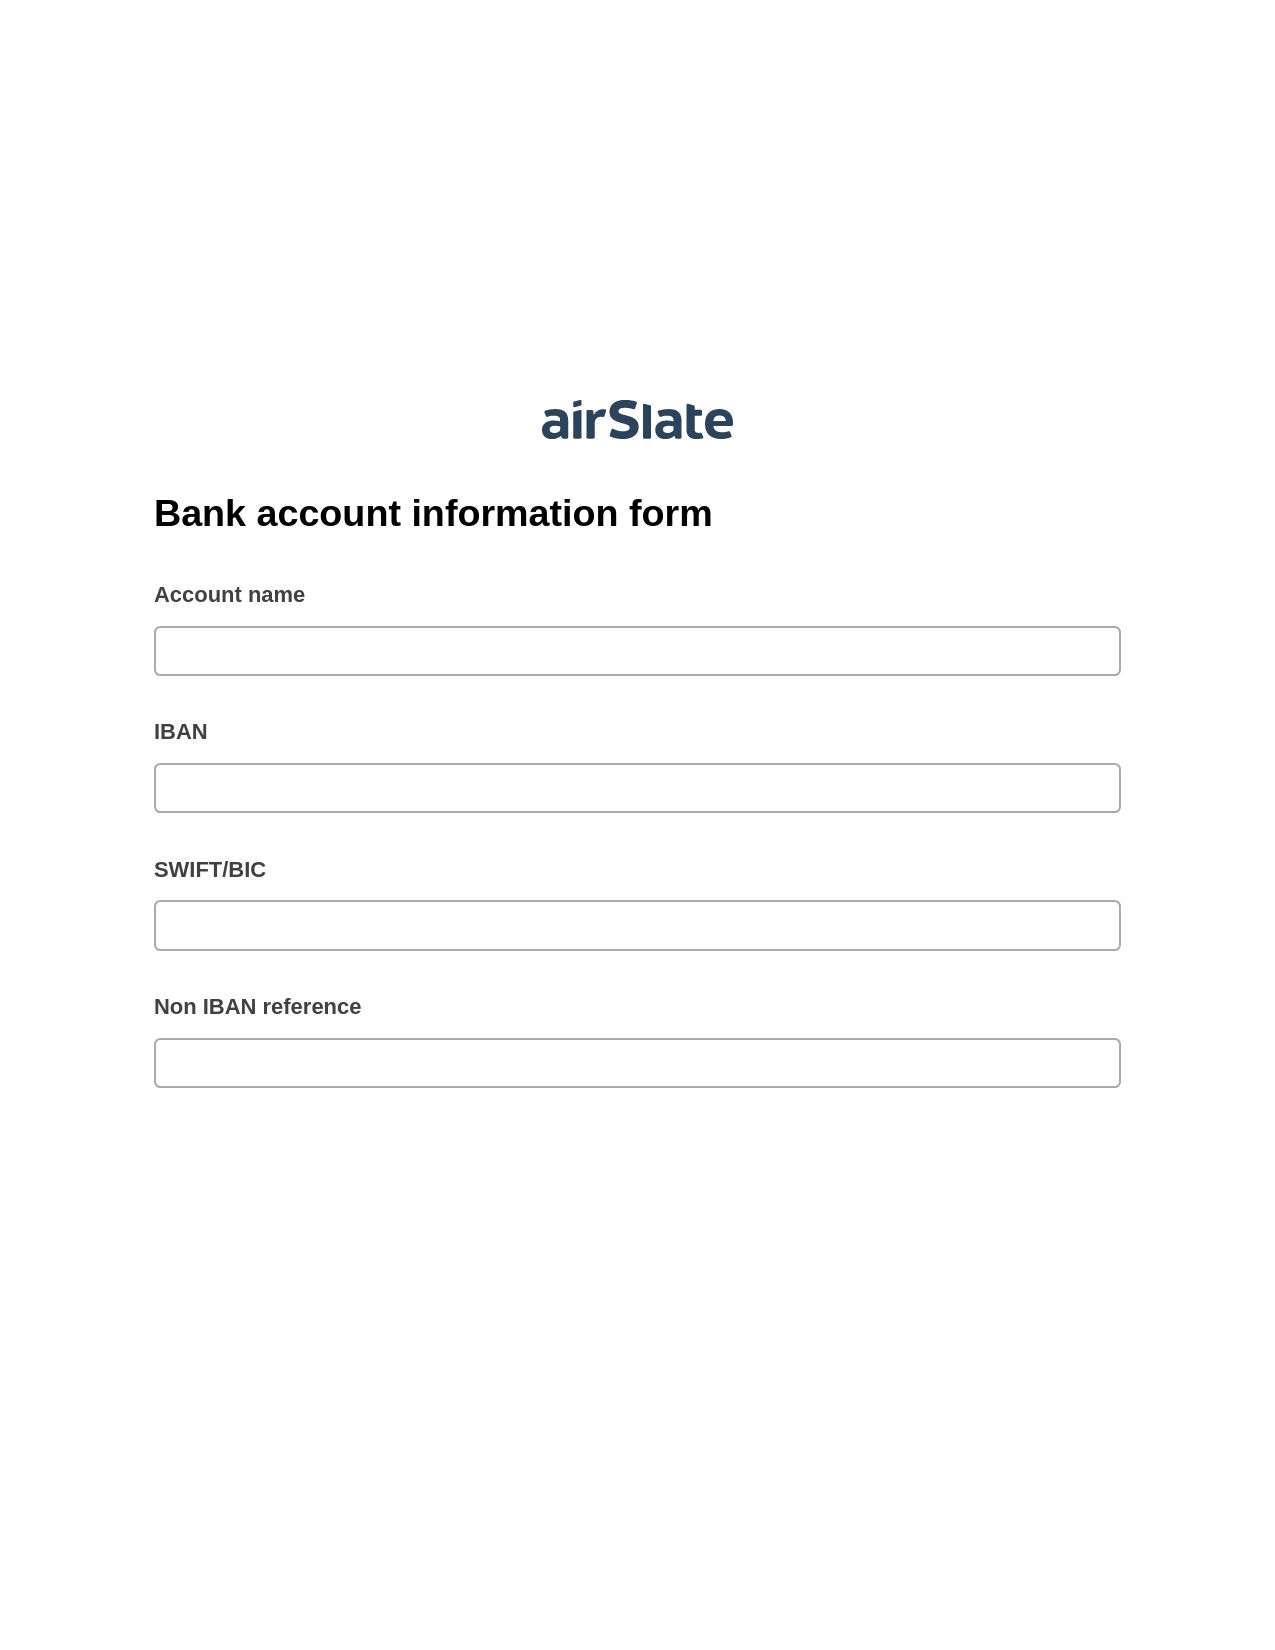 Bank account information form Pre-fill from MySQL Dropdown Options Bot, Unassign Role Bot, Export to Salesforce Bot